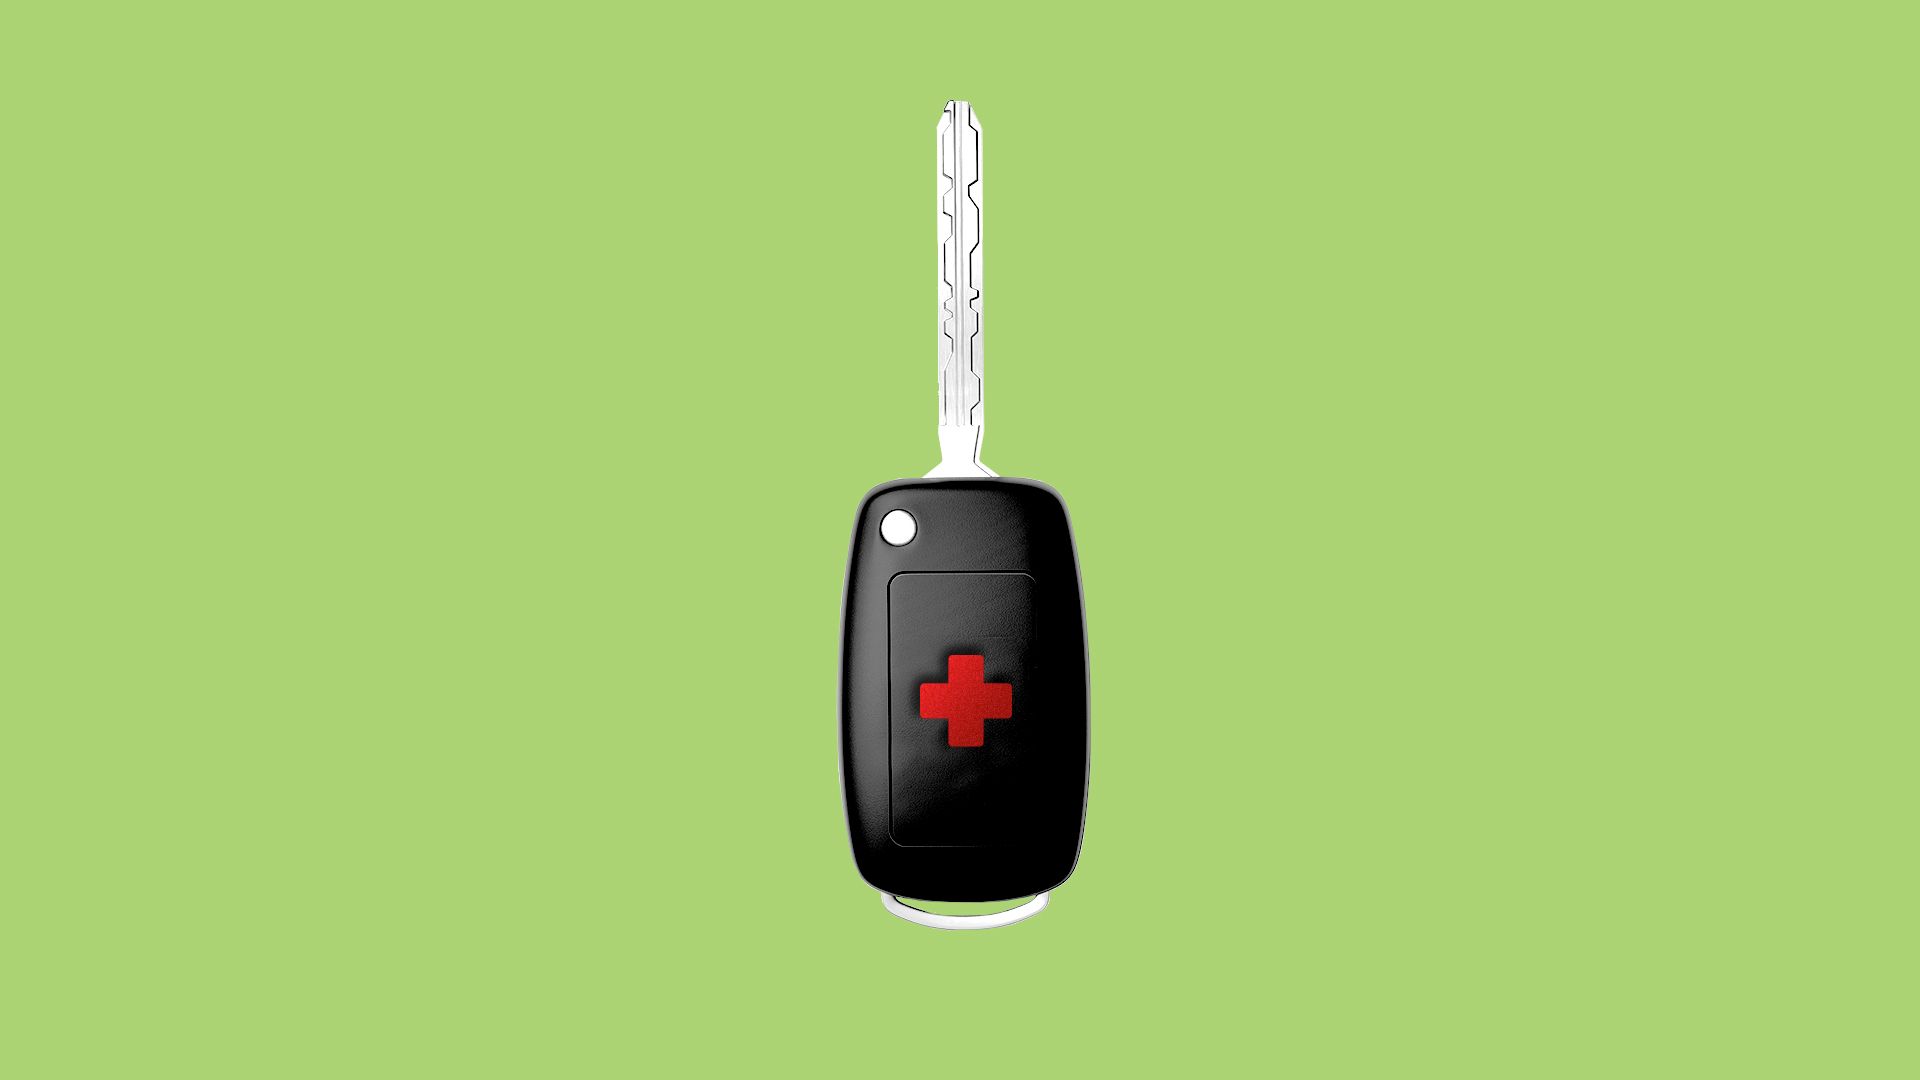 Illustration of a car key with a health plus on the unlock button. 